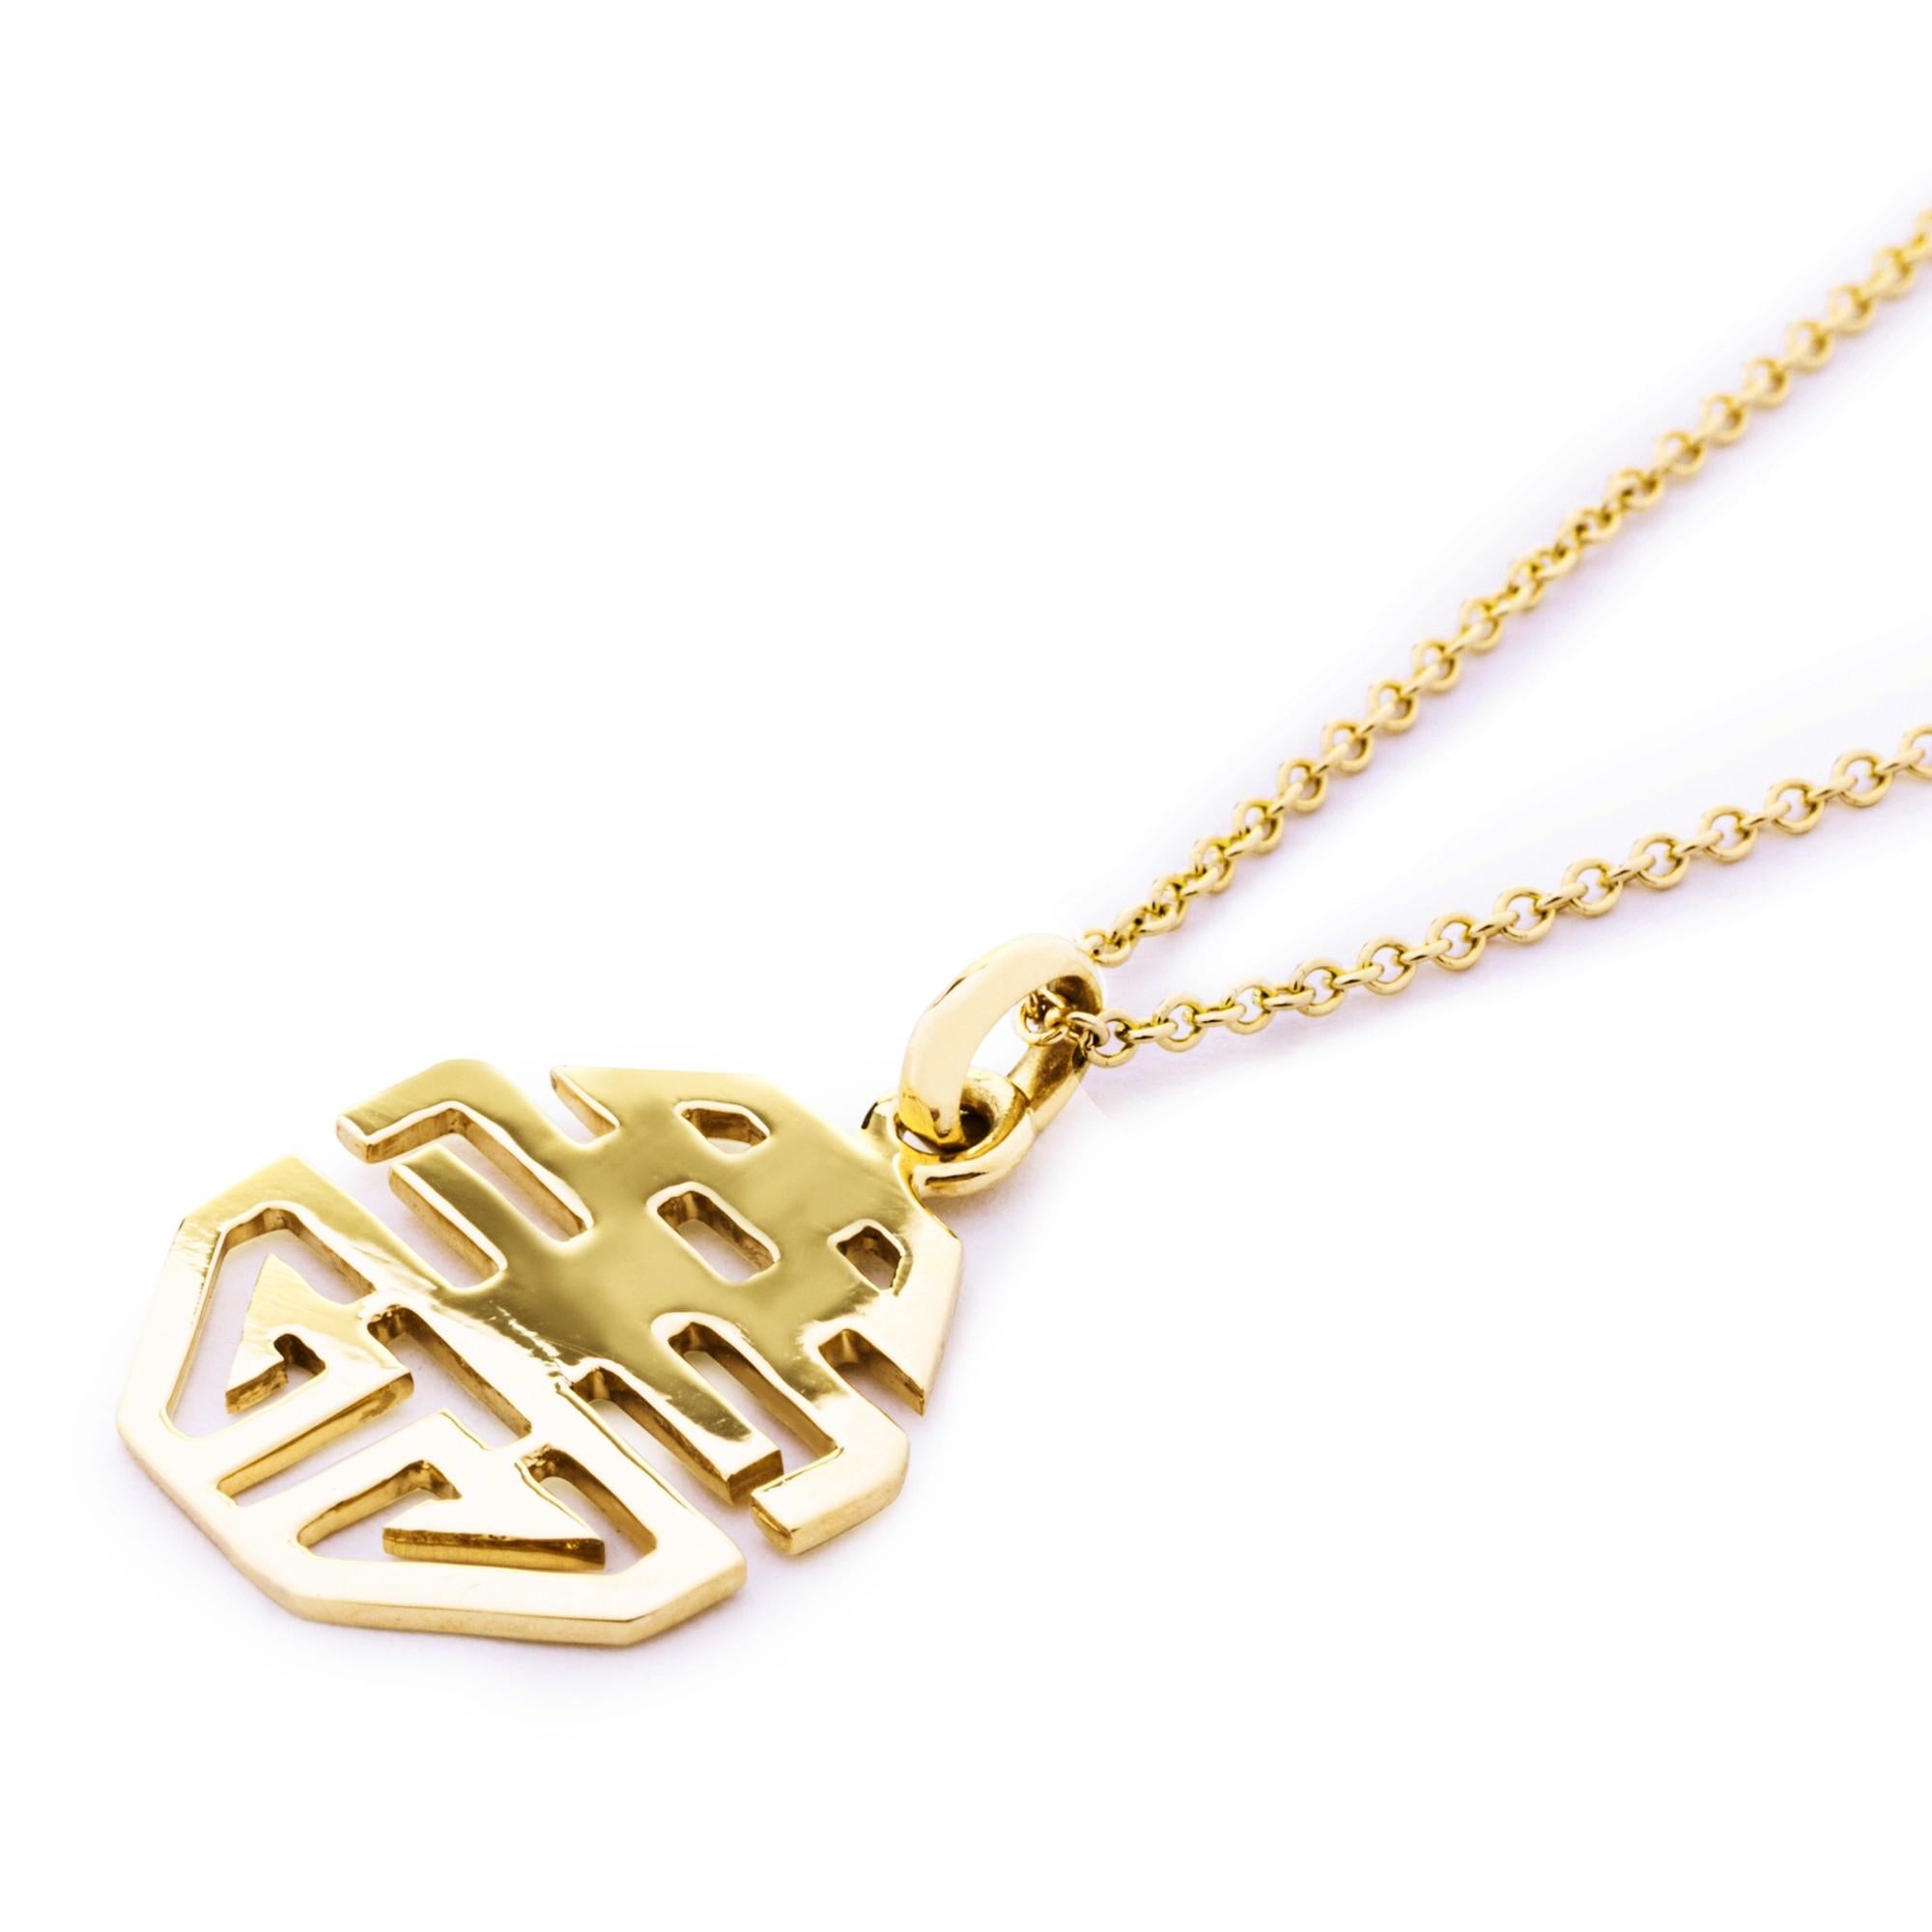 Alex Jona Octagonal Long and Happy Life 18 Karat Yellow Gold Pendant Necklace In New Condition For Sale In Torino, IT